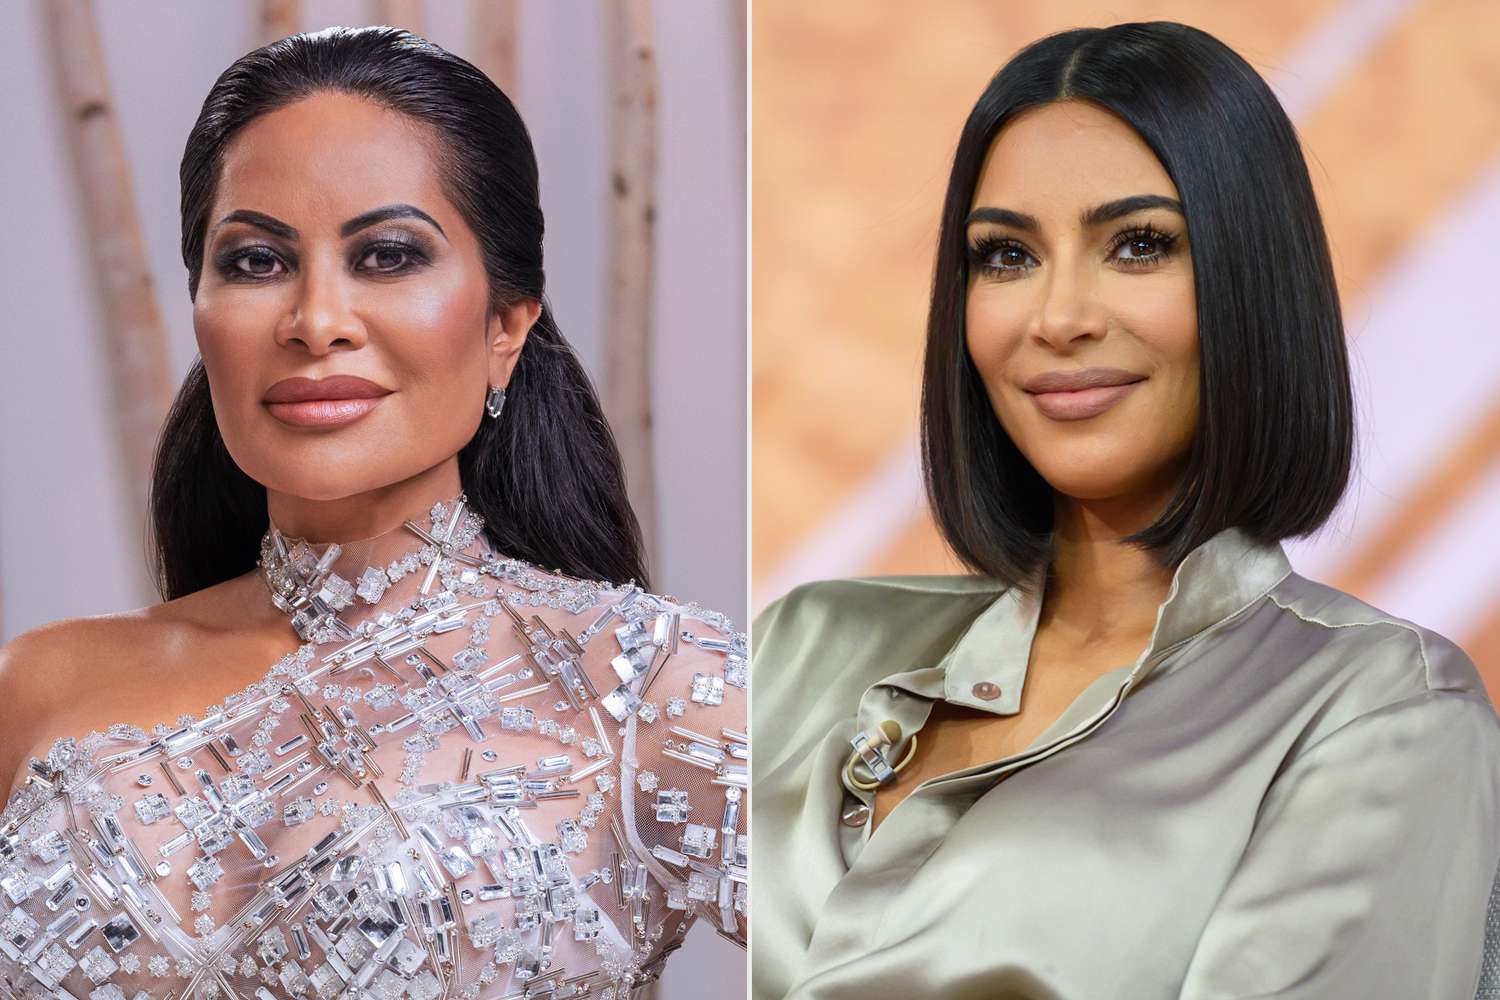 ‘RHOSLC’ Star Jen Shah Expresses Desire For Kim Kardashian To Portray Her In A Potential Biopic